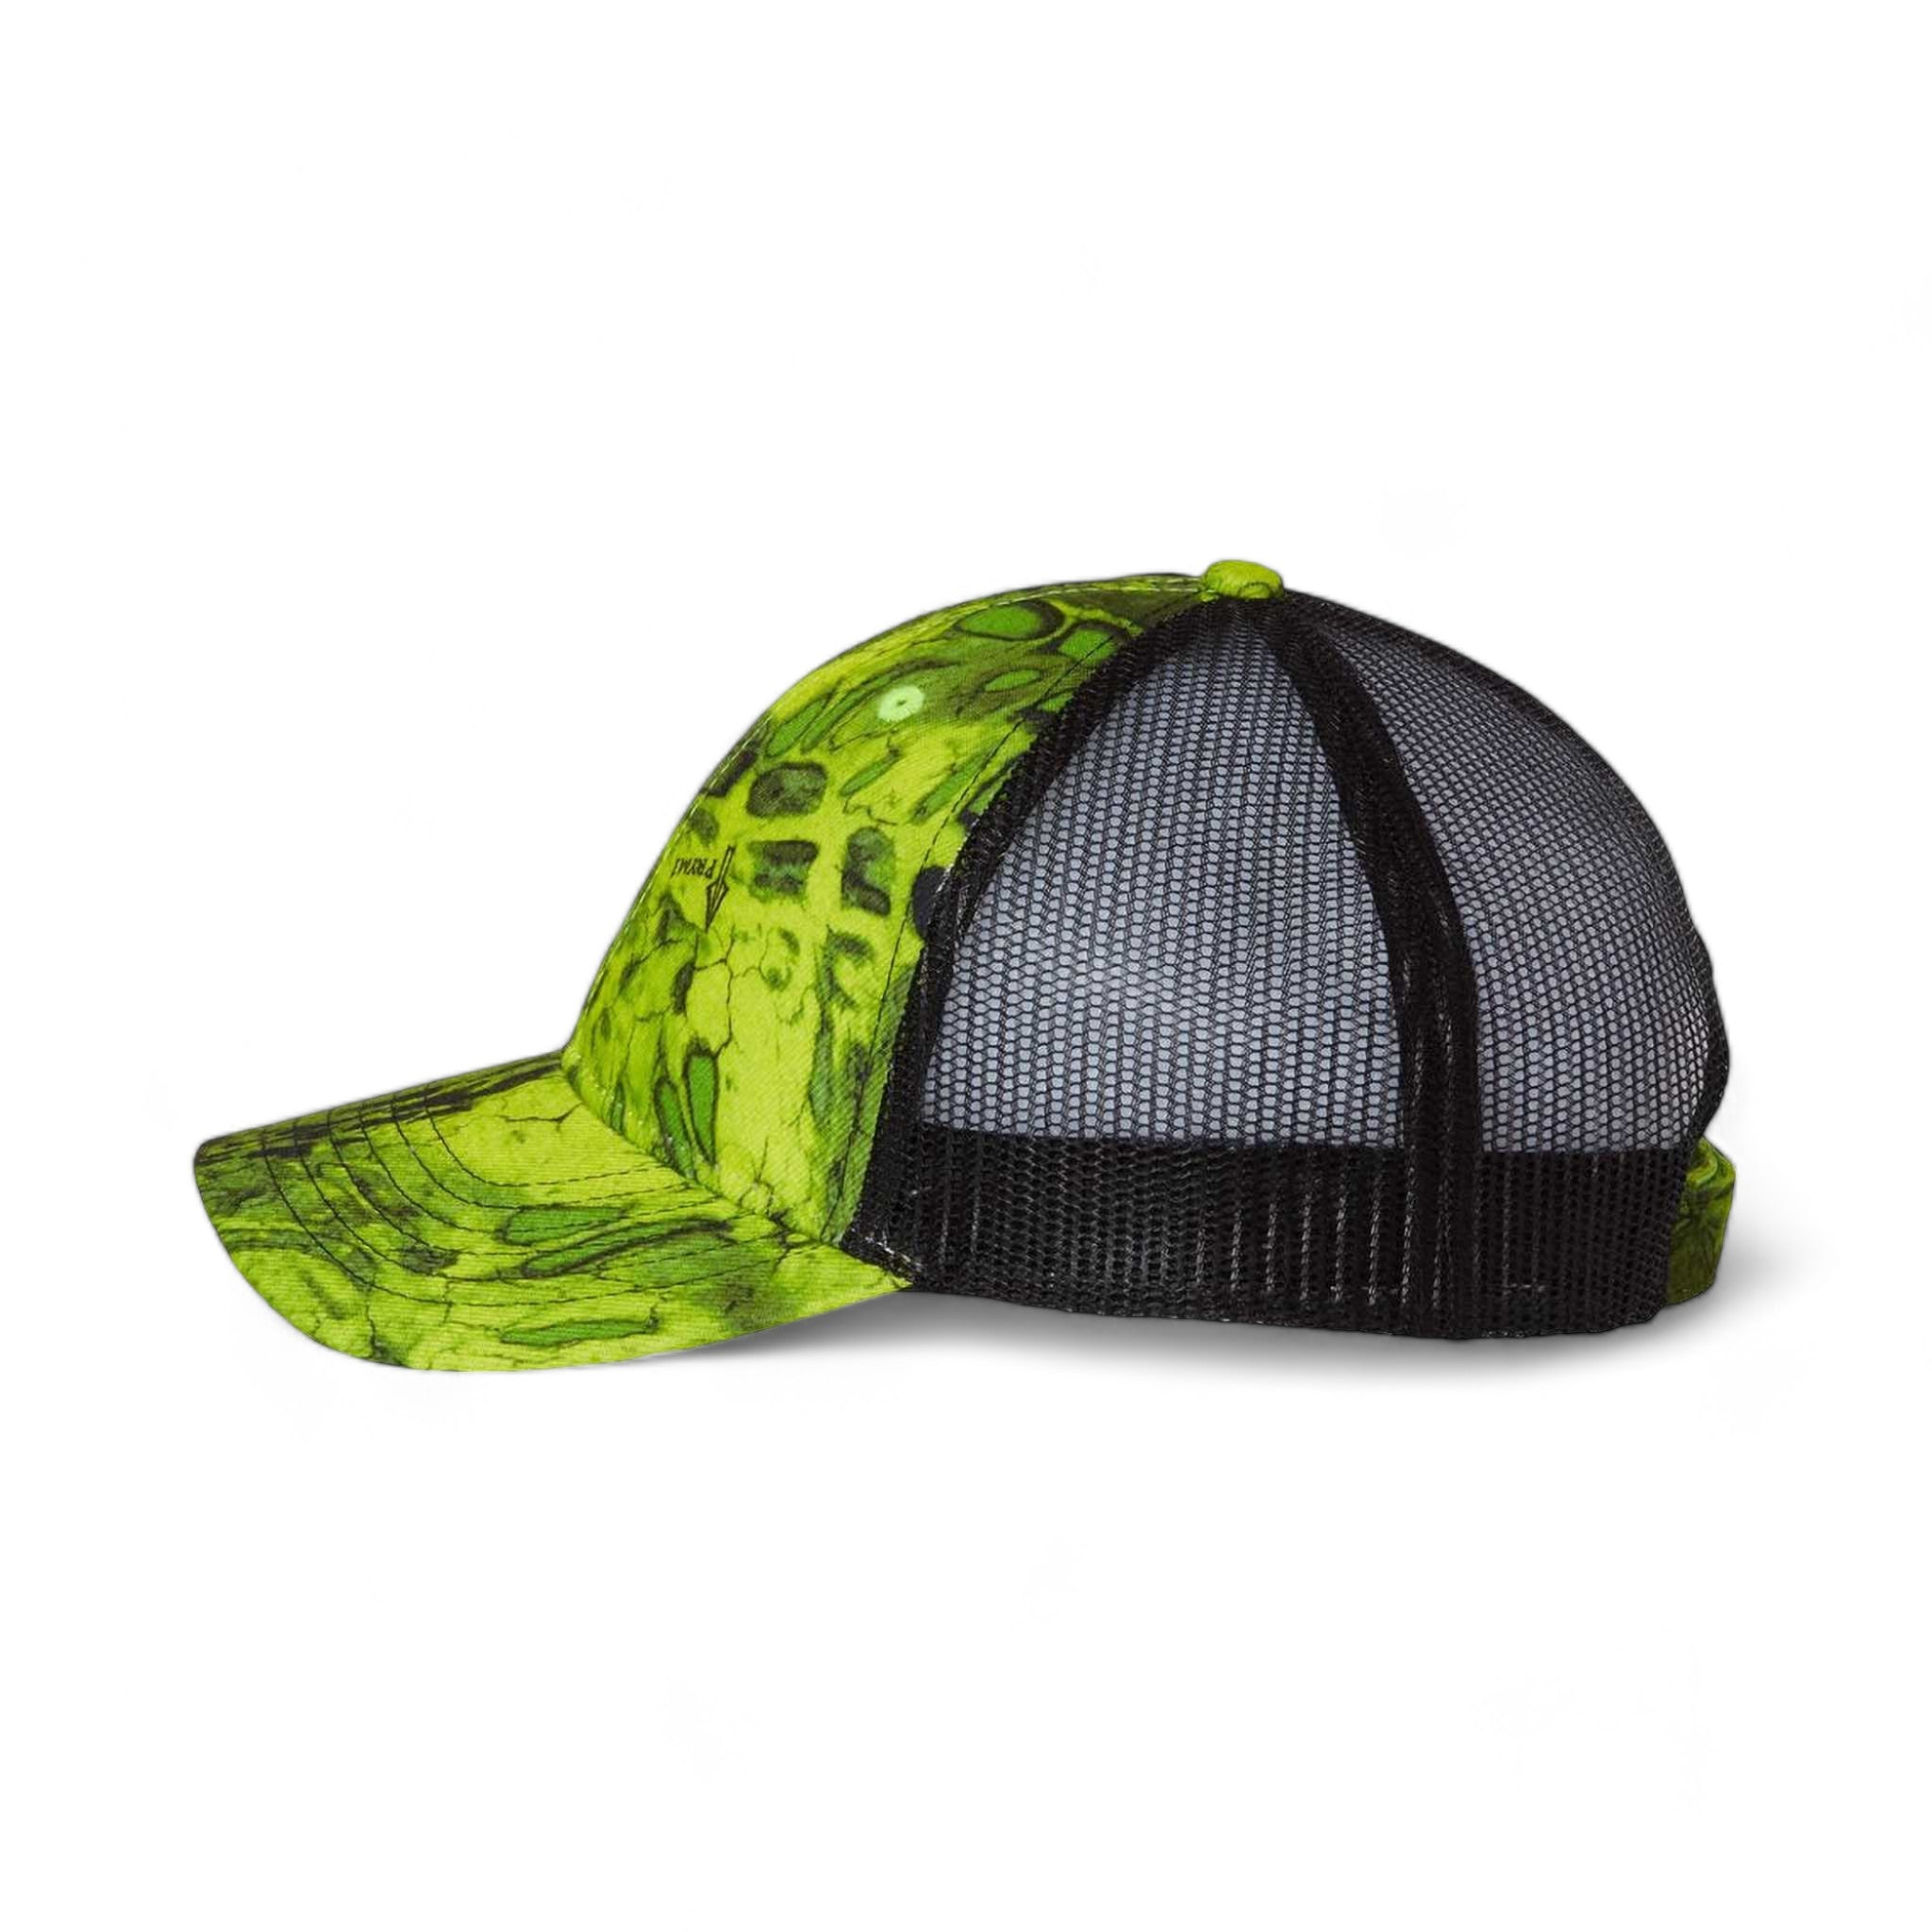 Side view of Kati LC5M custom hat in prym1 voltage yellow and black